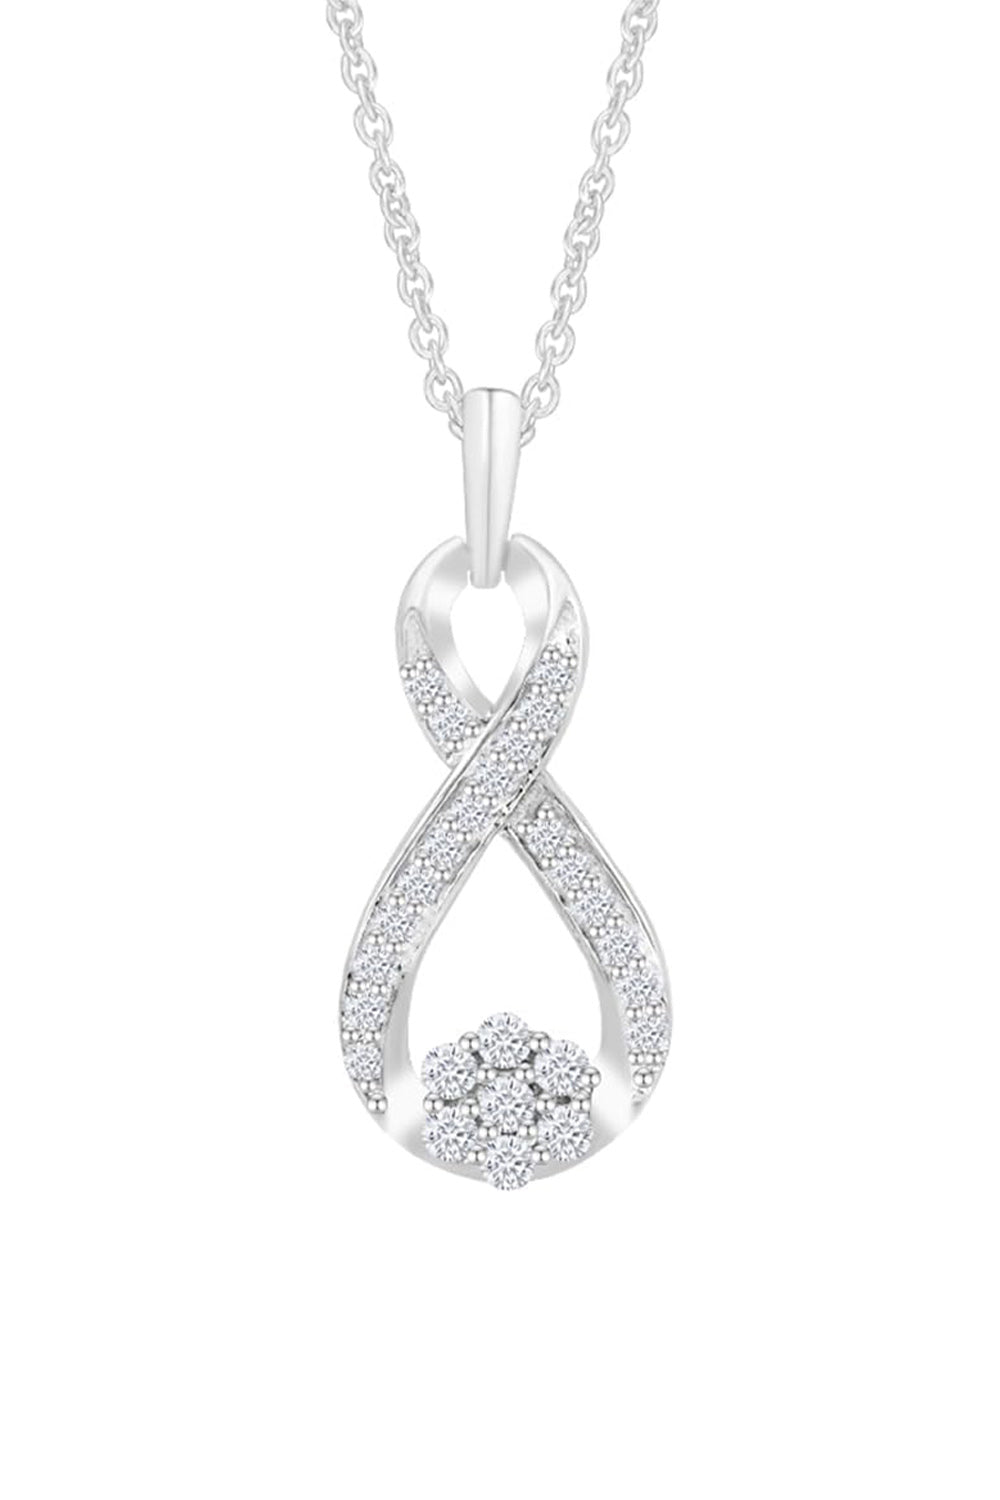 White Gold Color Ladies Infinity Pendant Necklace